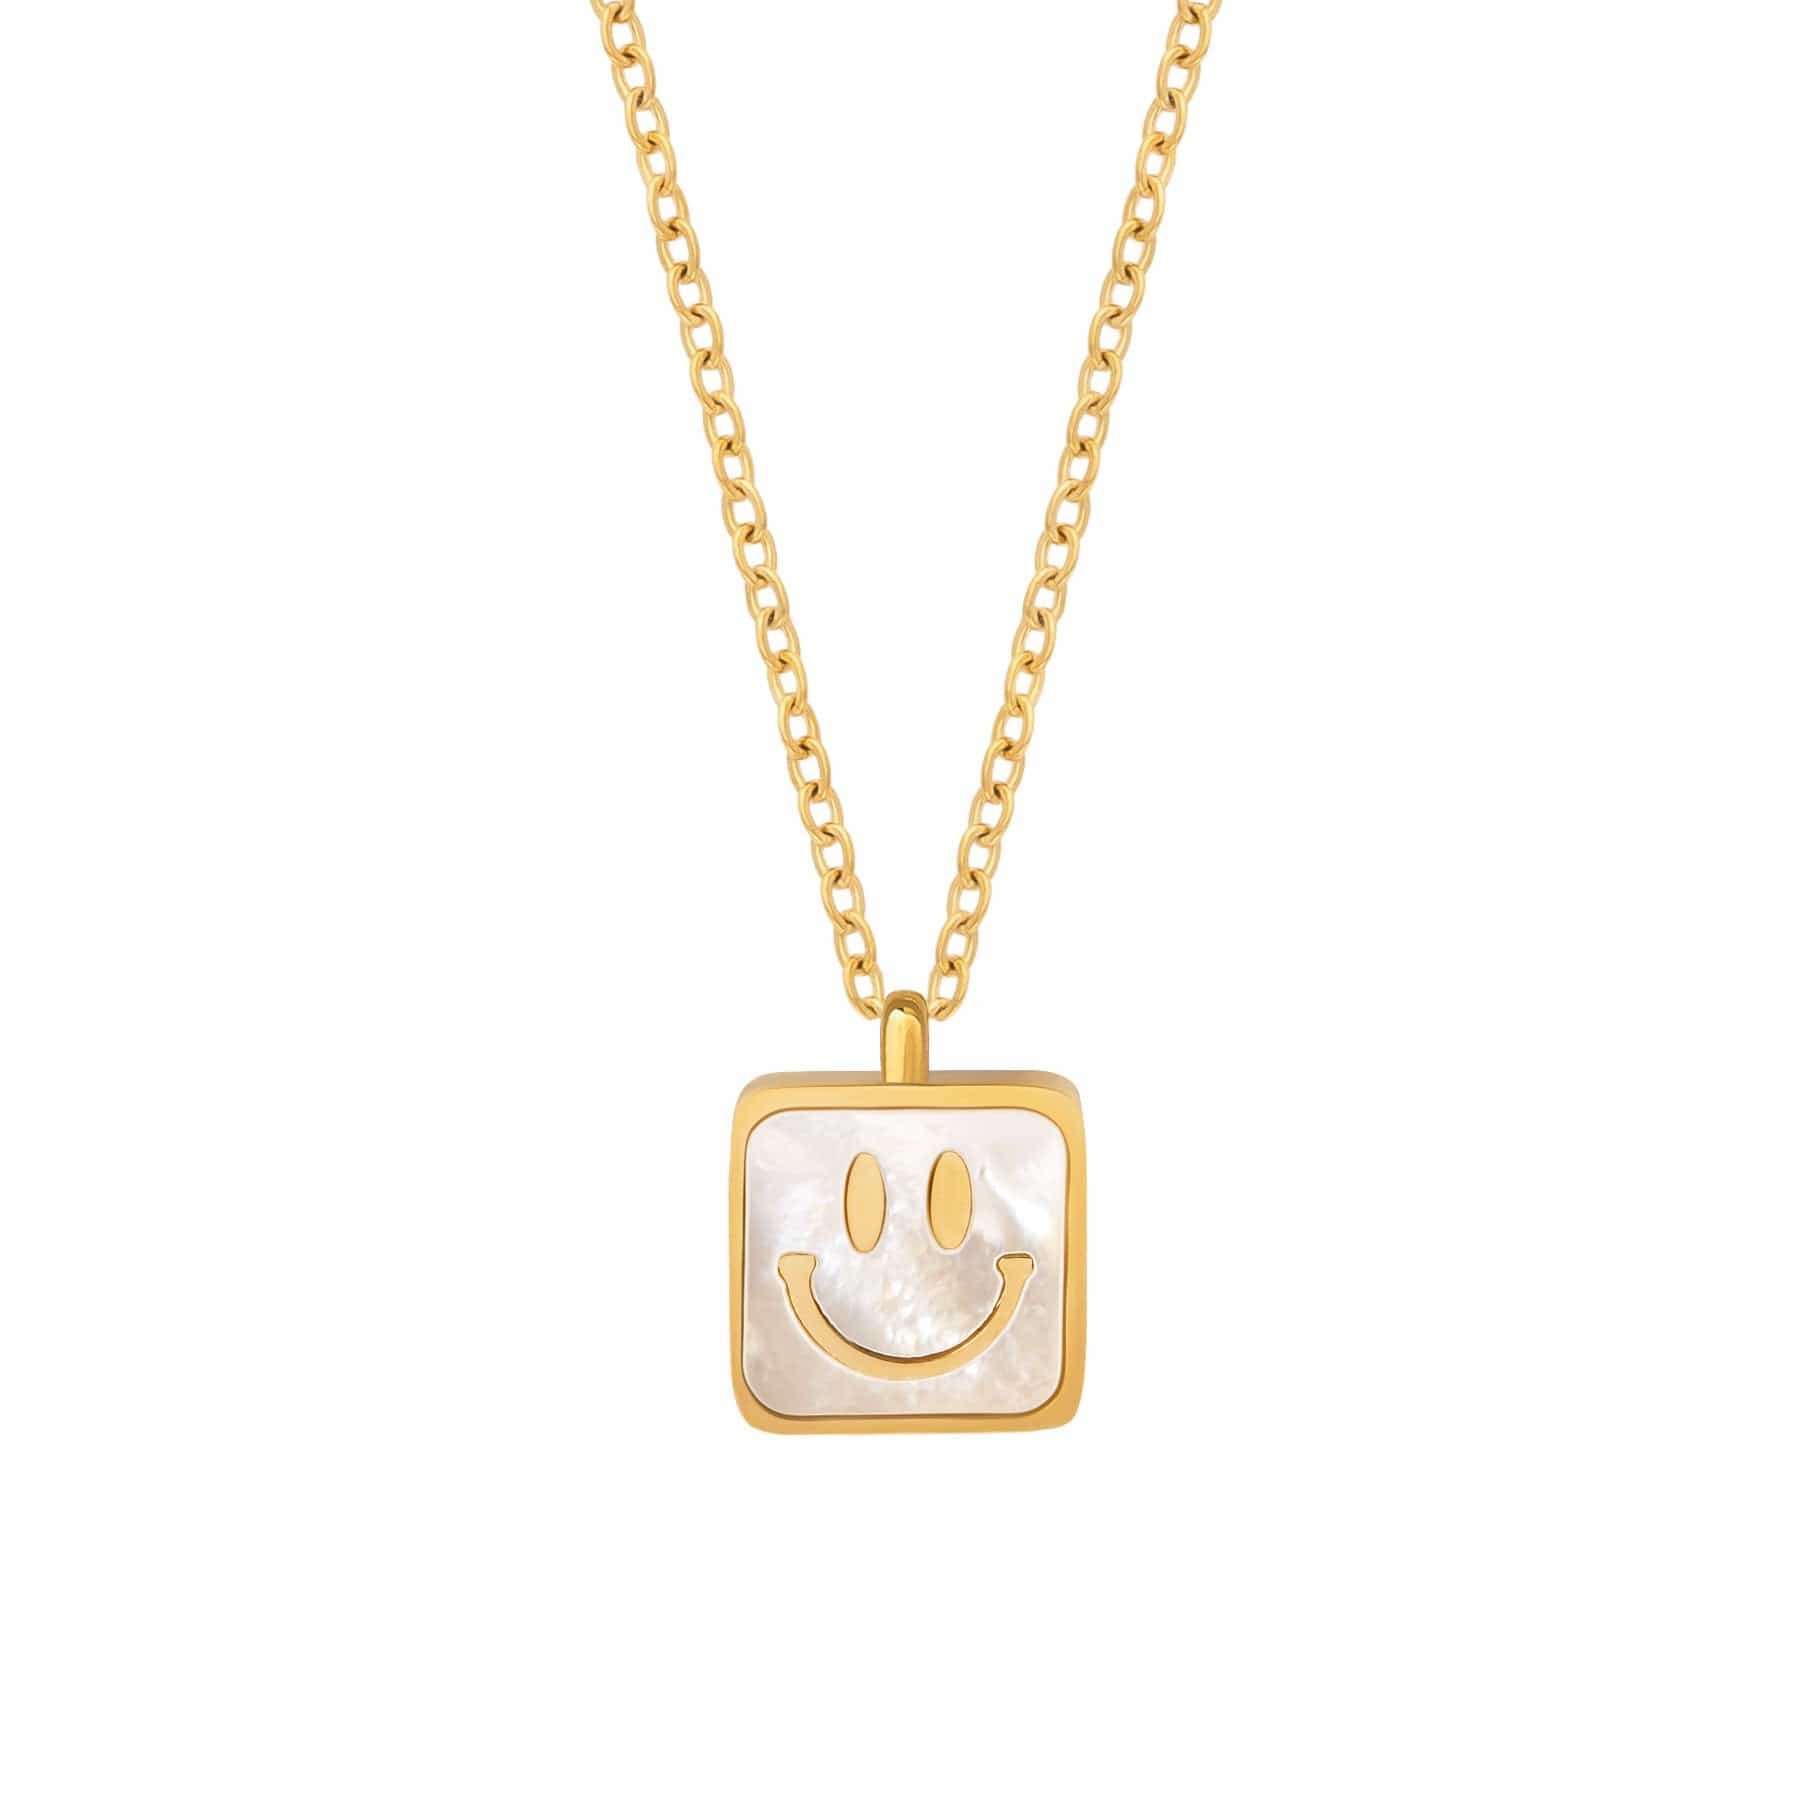 BohoMoon Stainless Steel Hope Necklace Gold